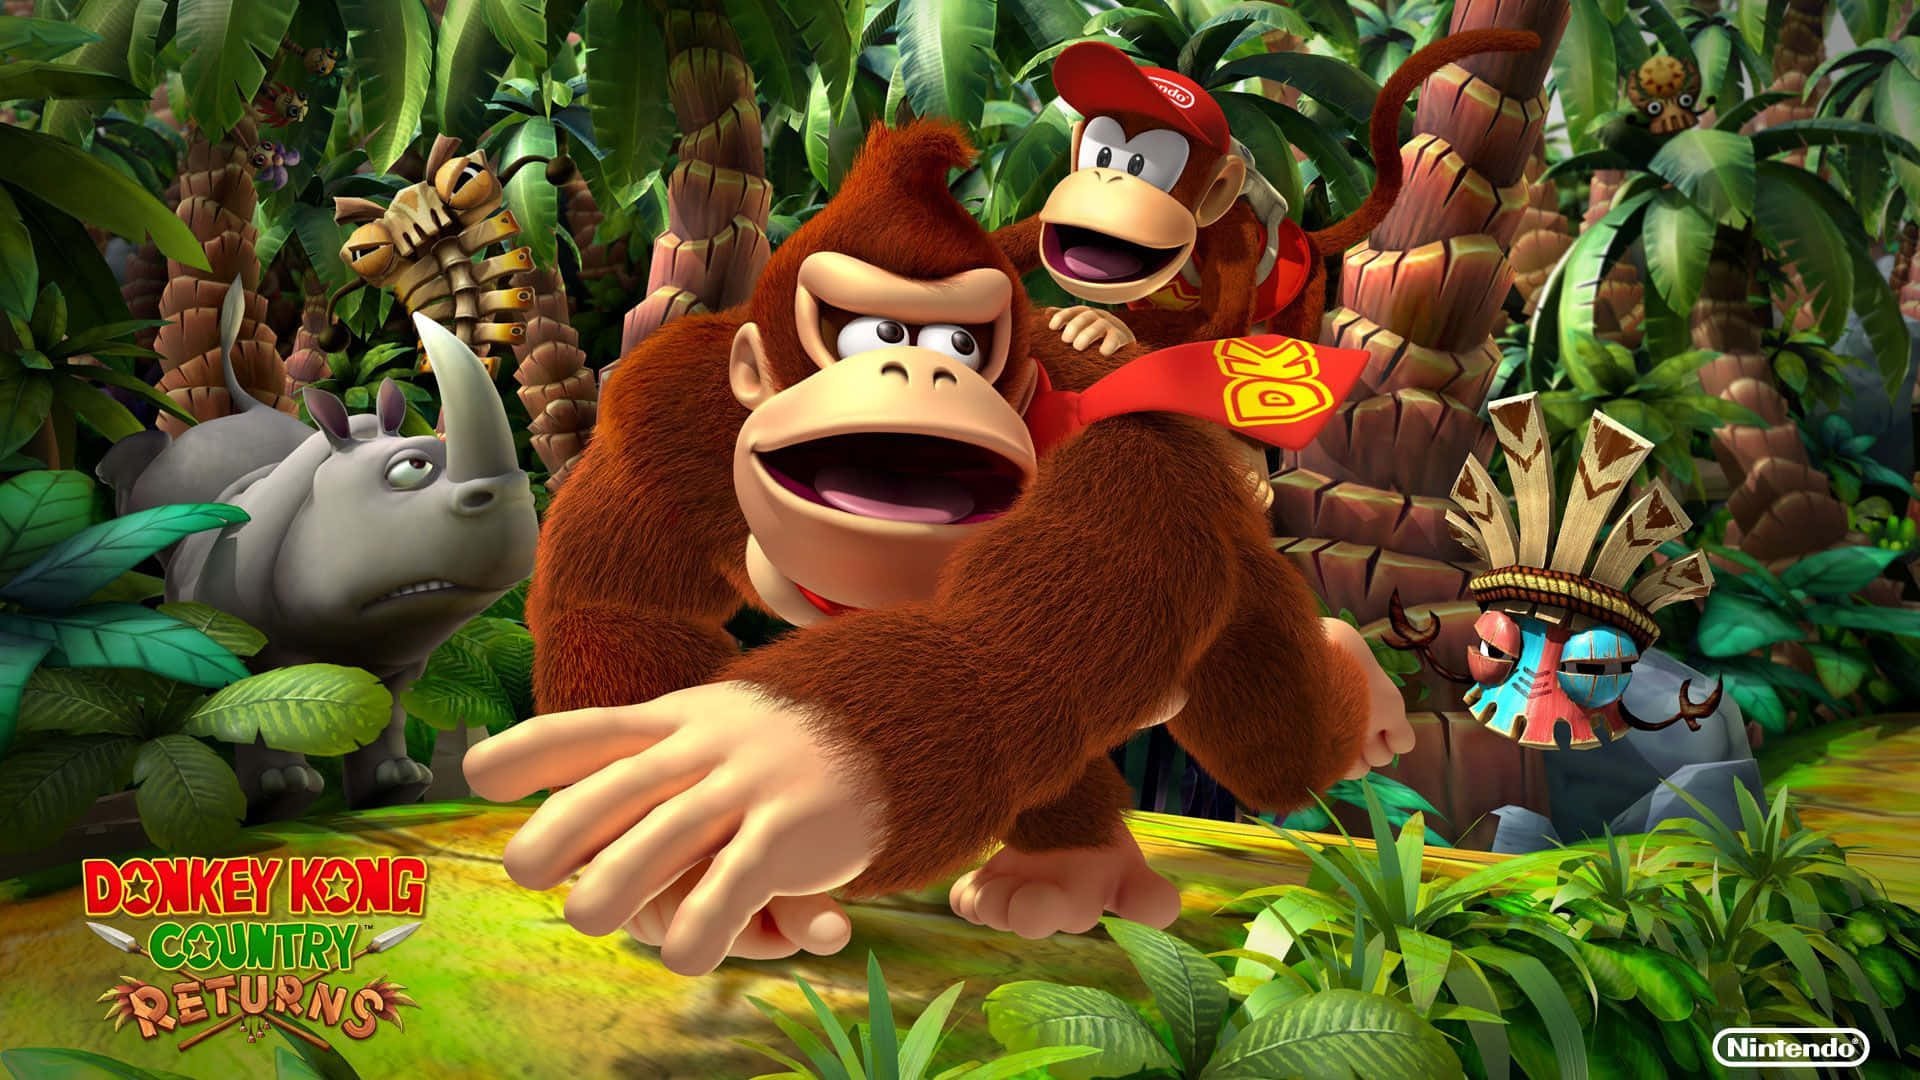 Donkey Kong In Action With Wooden Barrels Background